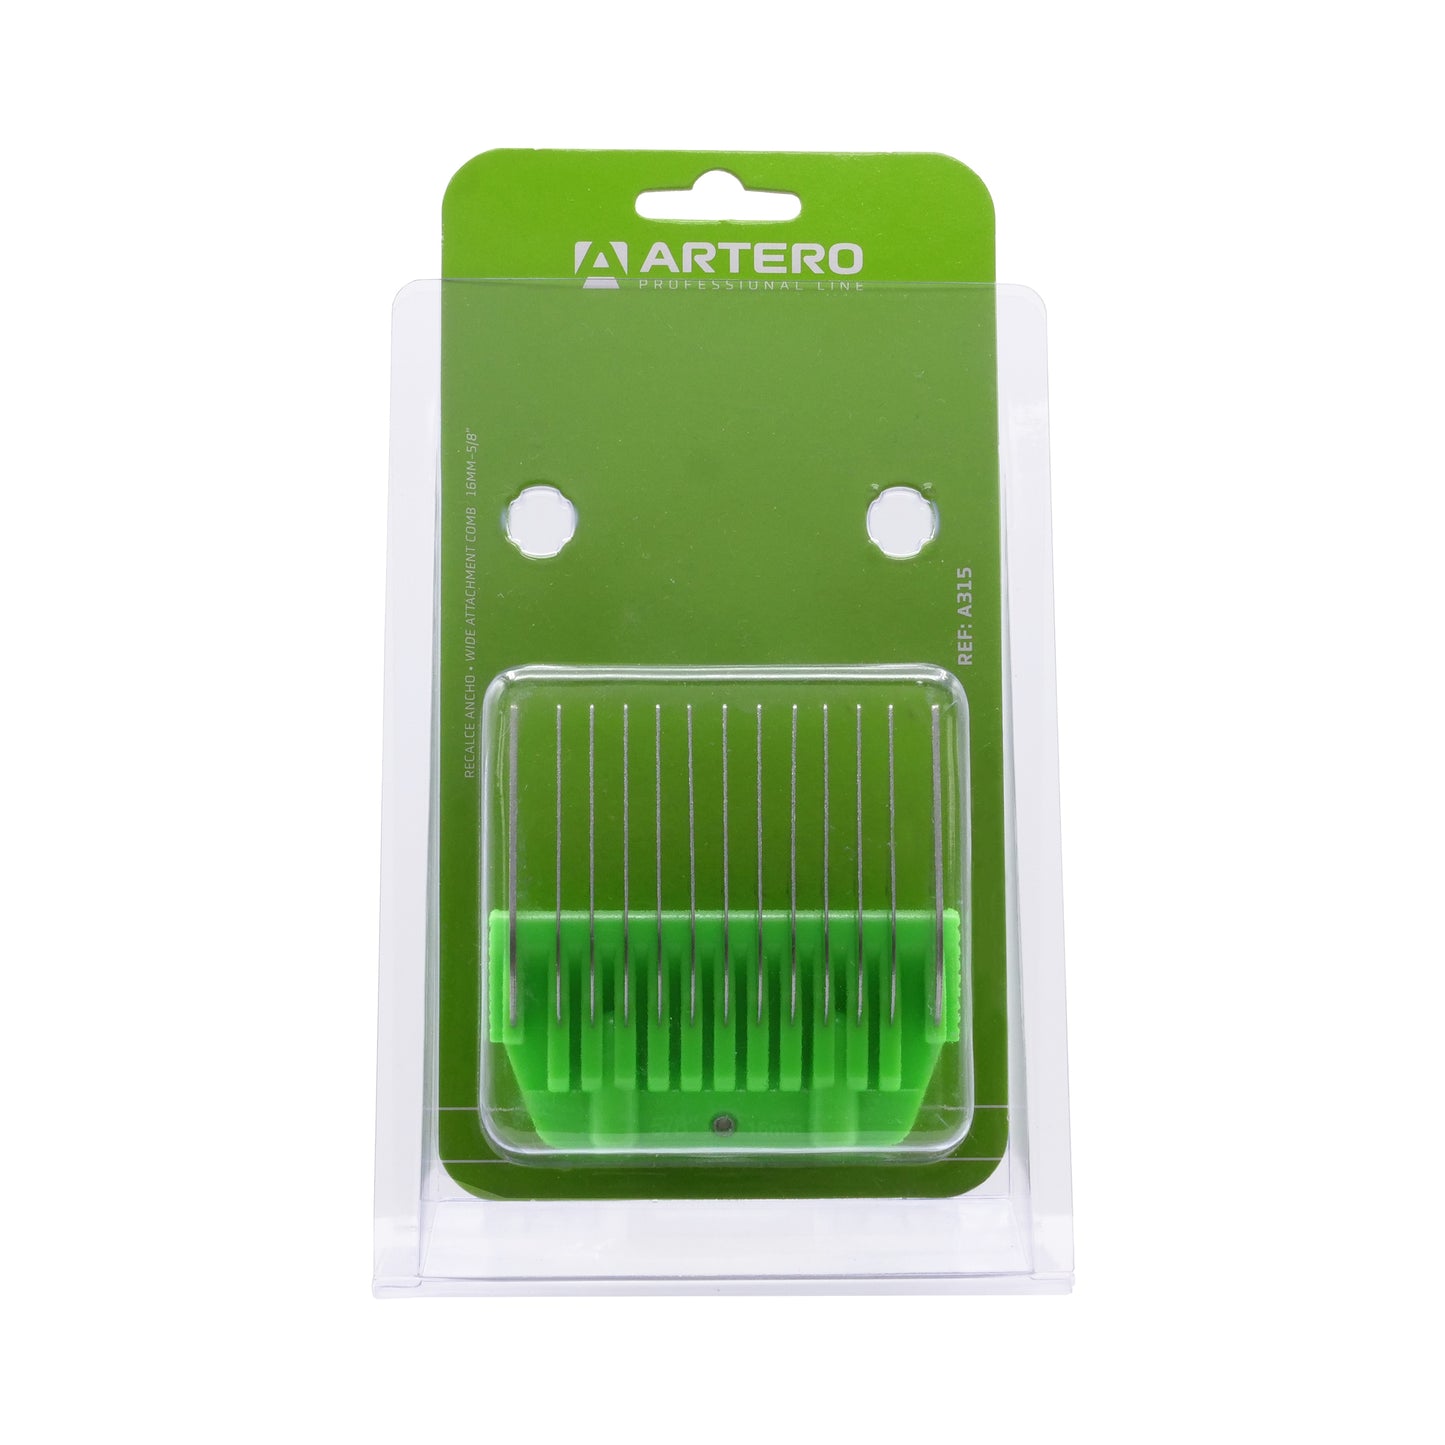 The Artero Wide Snap-On Metal Comb 16mm - 5/8" is designed for use with the Artero A5 wide clipper blade and offers a smooth, even finish. This comb is also compatible with Andis, Moser, Heiniger, Oster, and Aesculap Fav5 and Fav5 CL blades. Features: Cutting height: 5/8" Metal Construction Fits A5 Clippers.